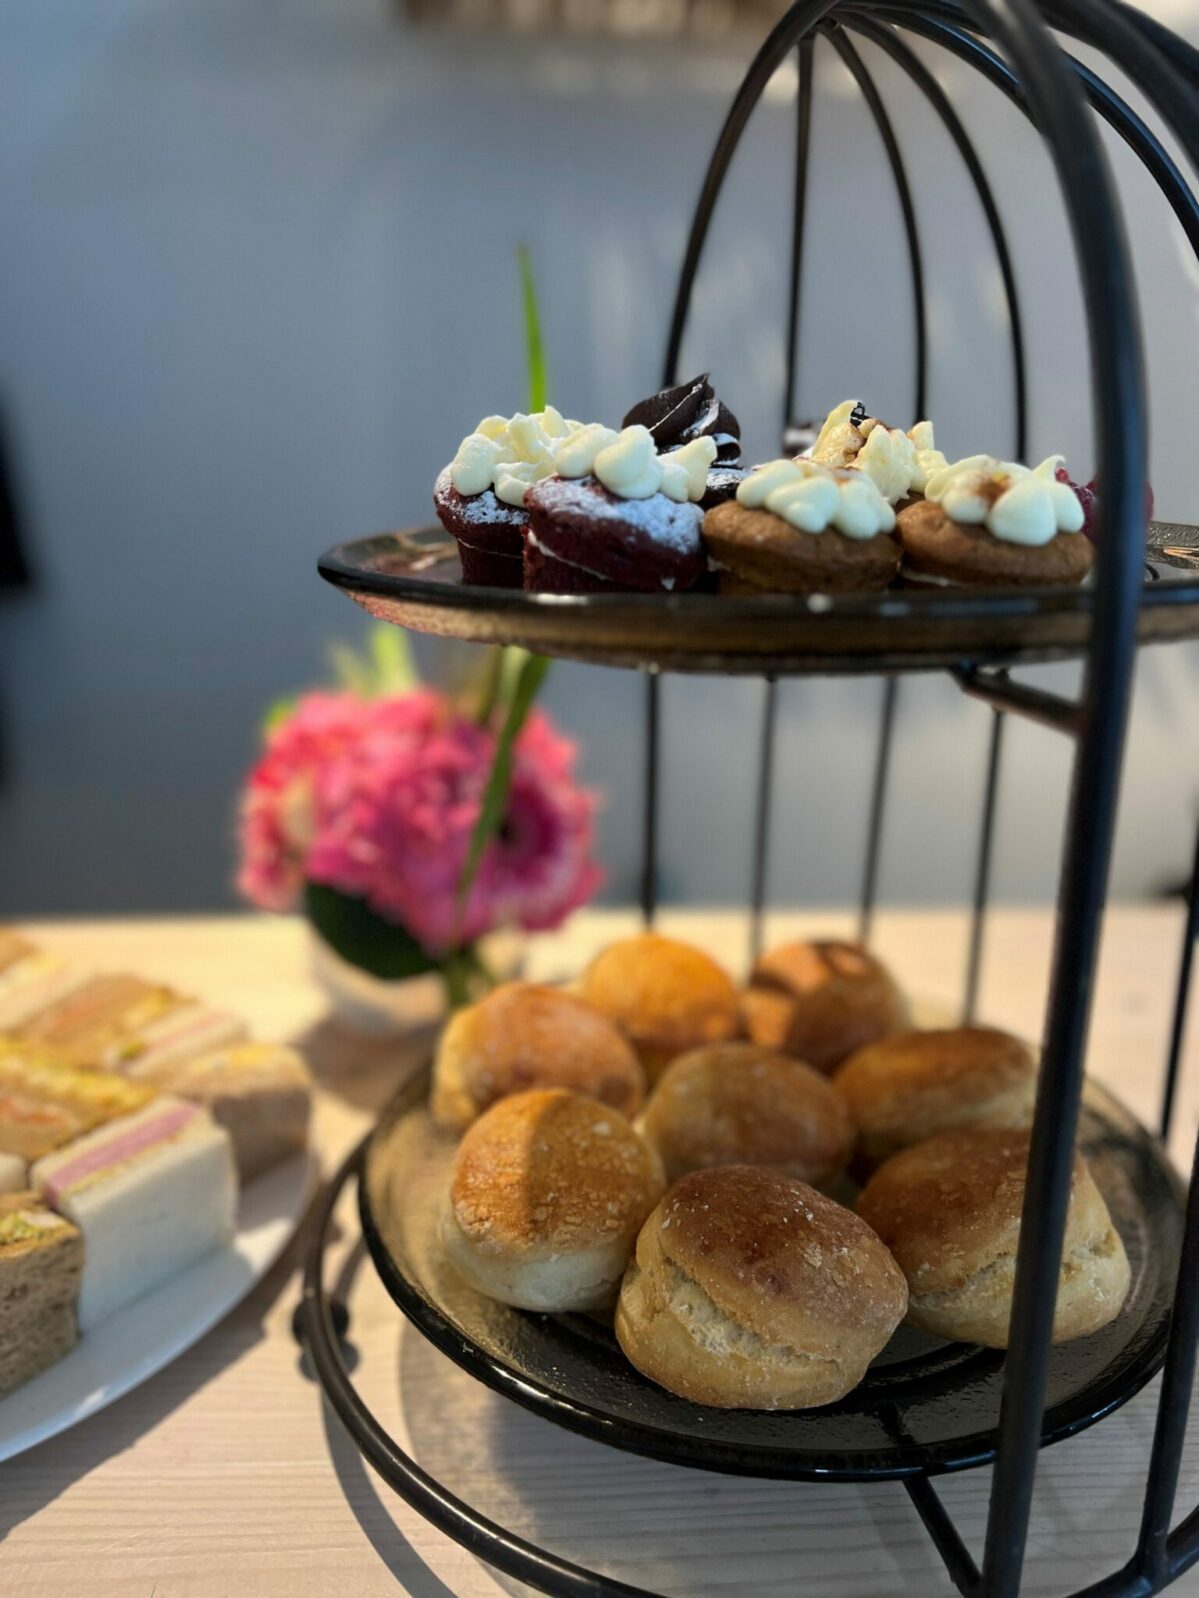 Afternoon tea served at Ascot